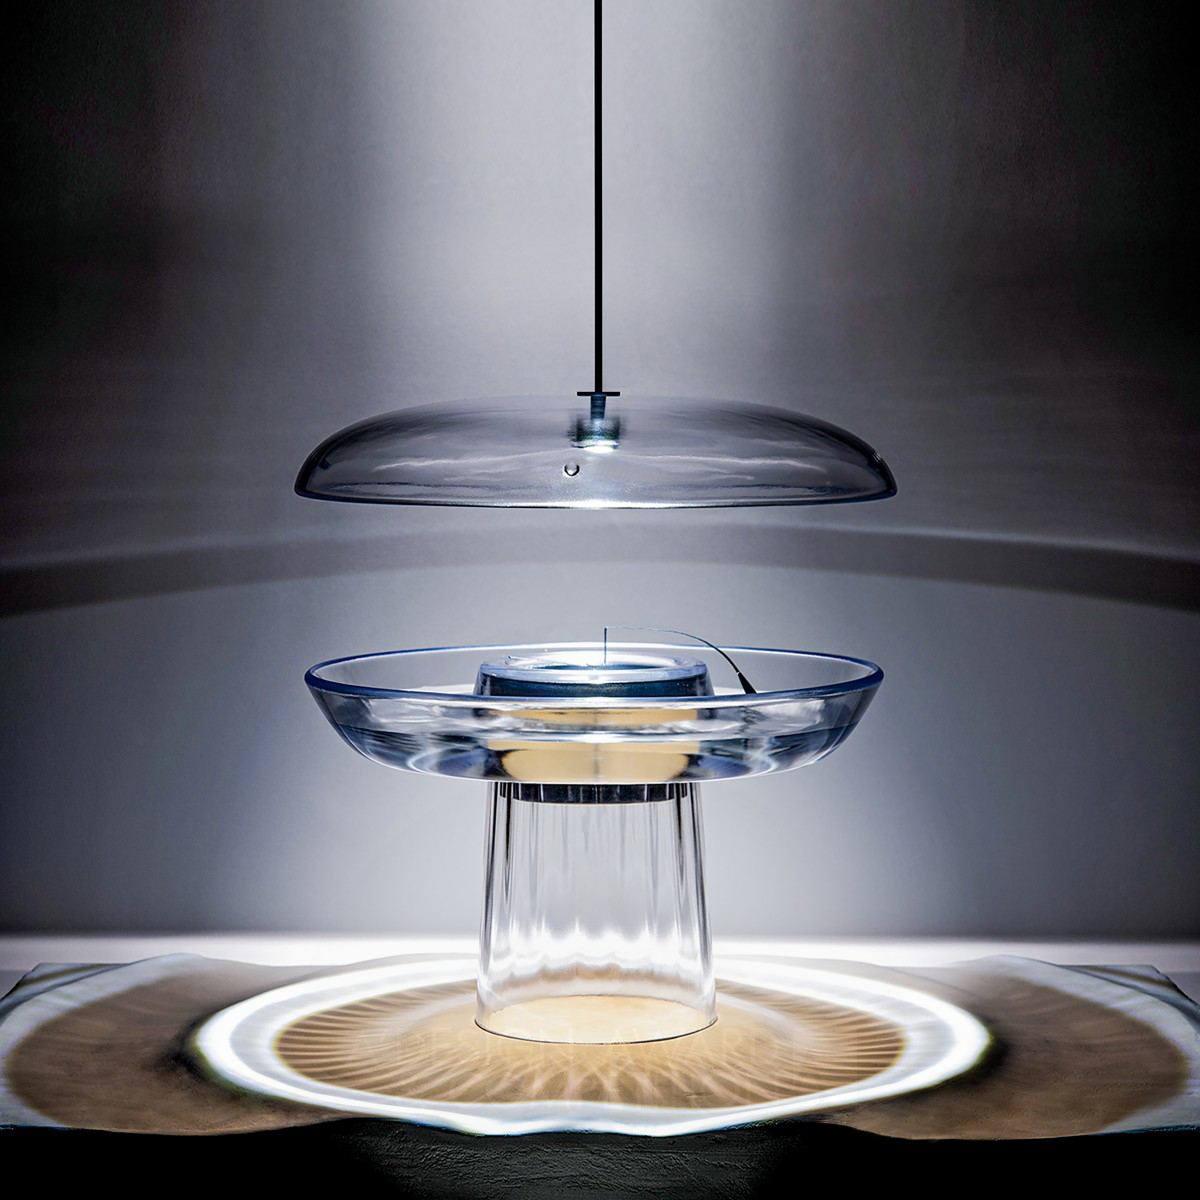 TAI,HSIN-KAI wins Silver at the prestigious A' Lighting Products and Fixtures Design Award with Zero Circular Light.